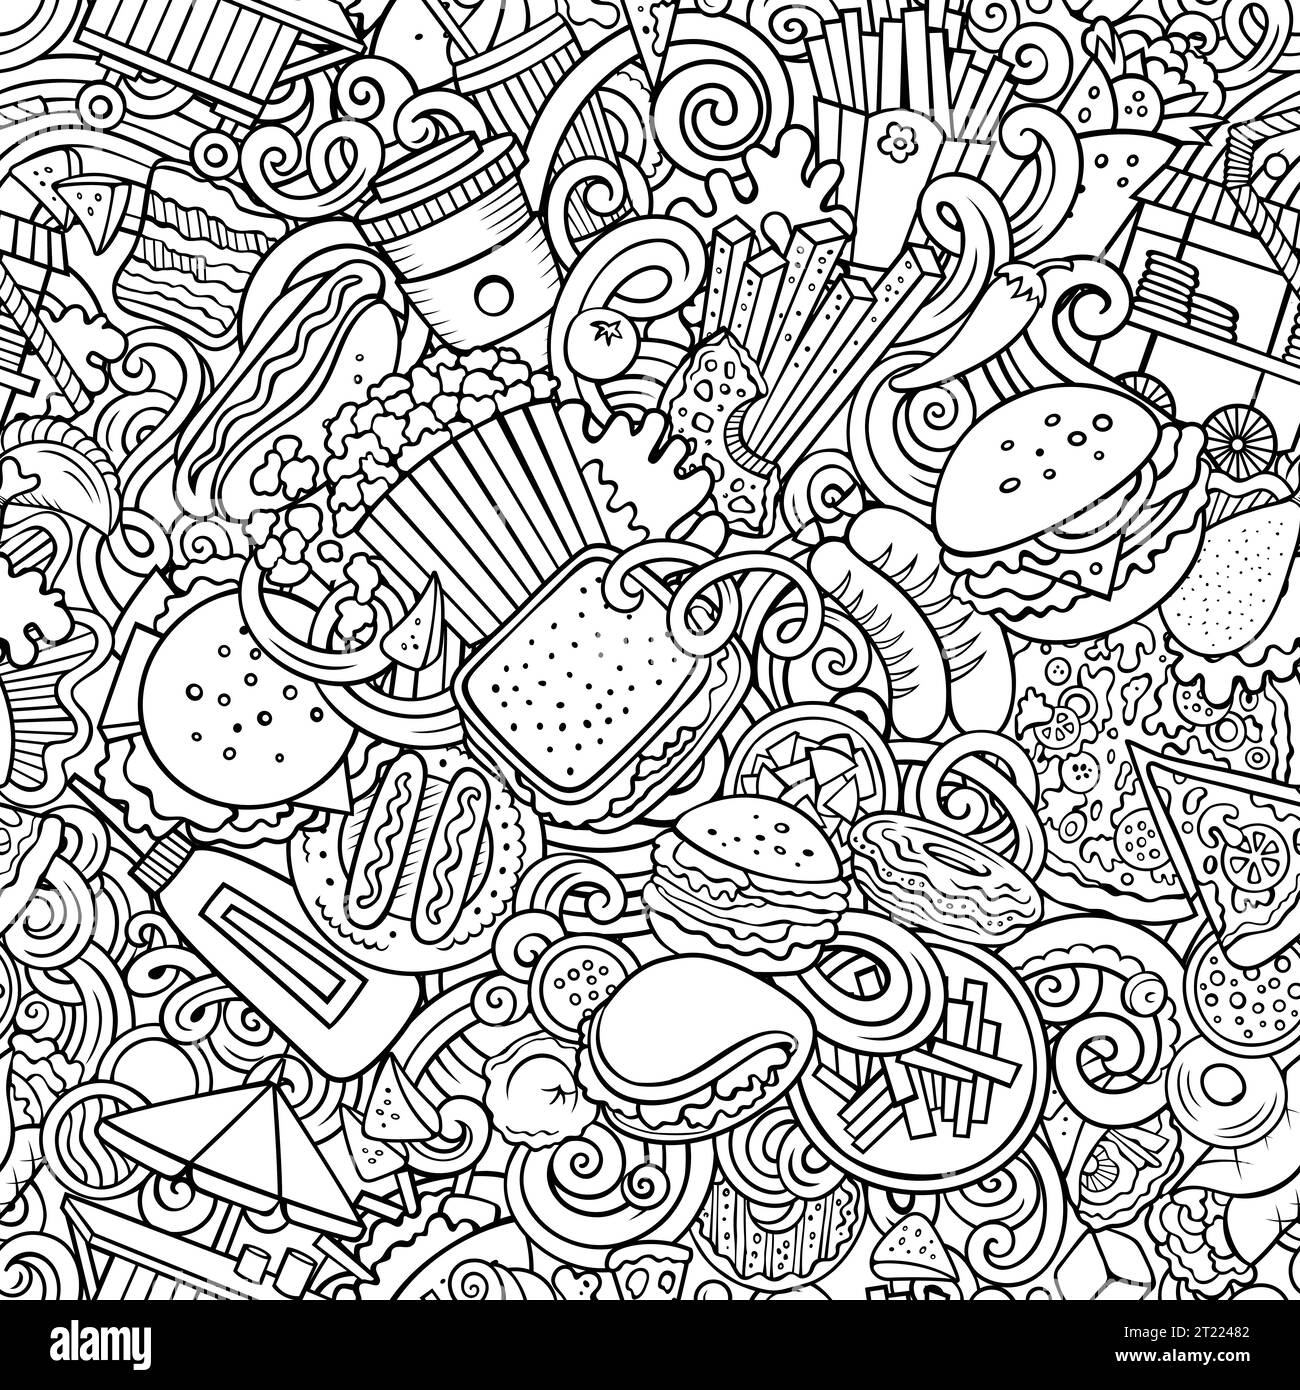 Cartoon doodle seamless pattern features a variety of Fastfood objects and symbols. Whimsical playful Junk food sketchy background for print on fabric Stock Vector